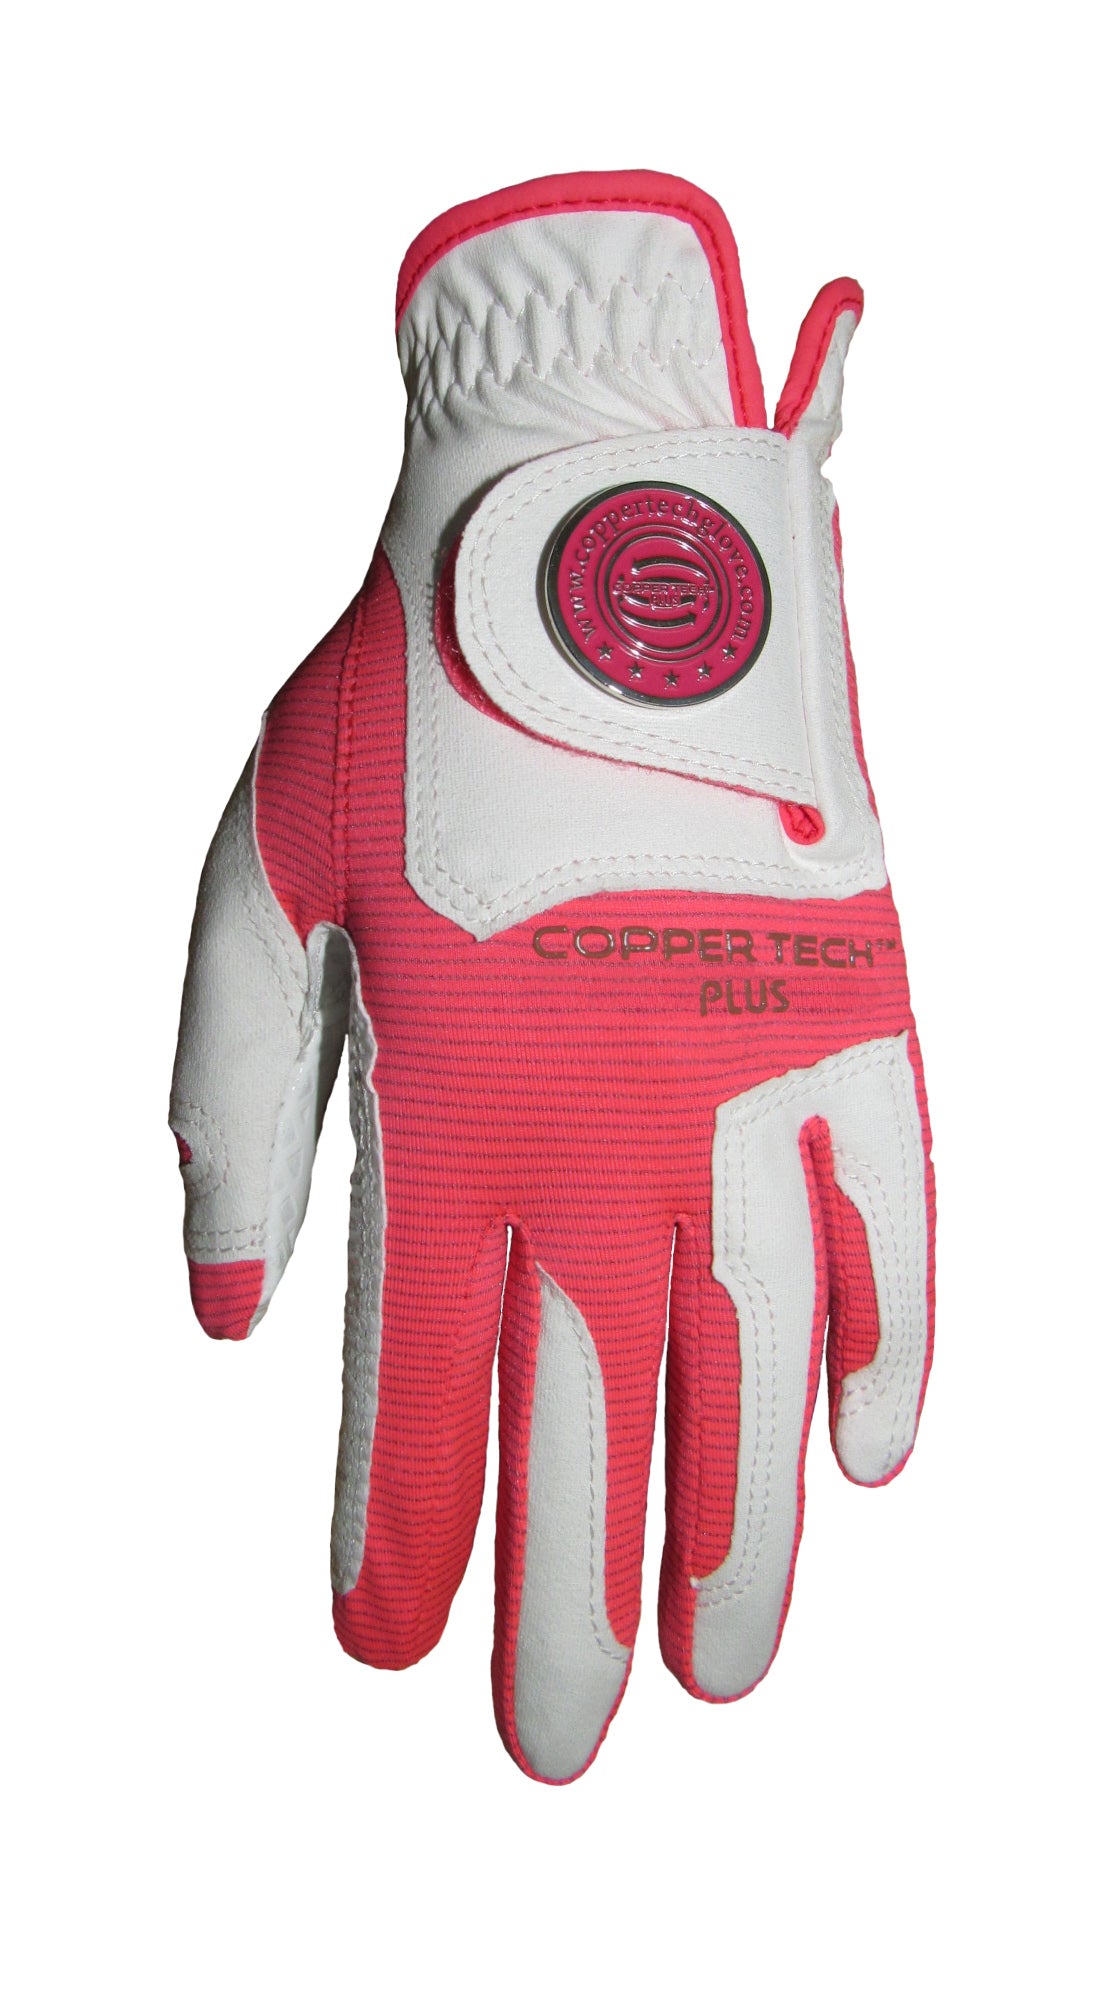 Copper Infused Golf Glove White/Neon Pink